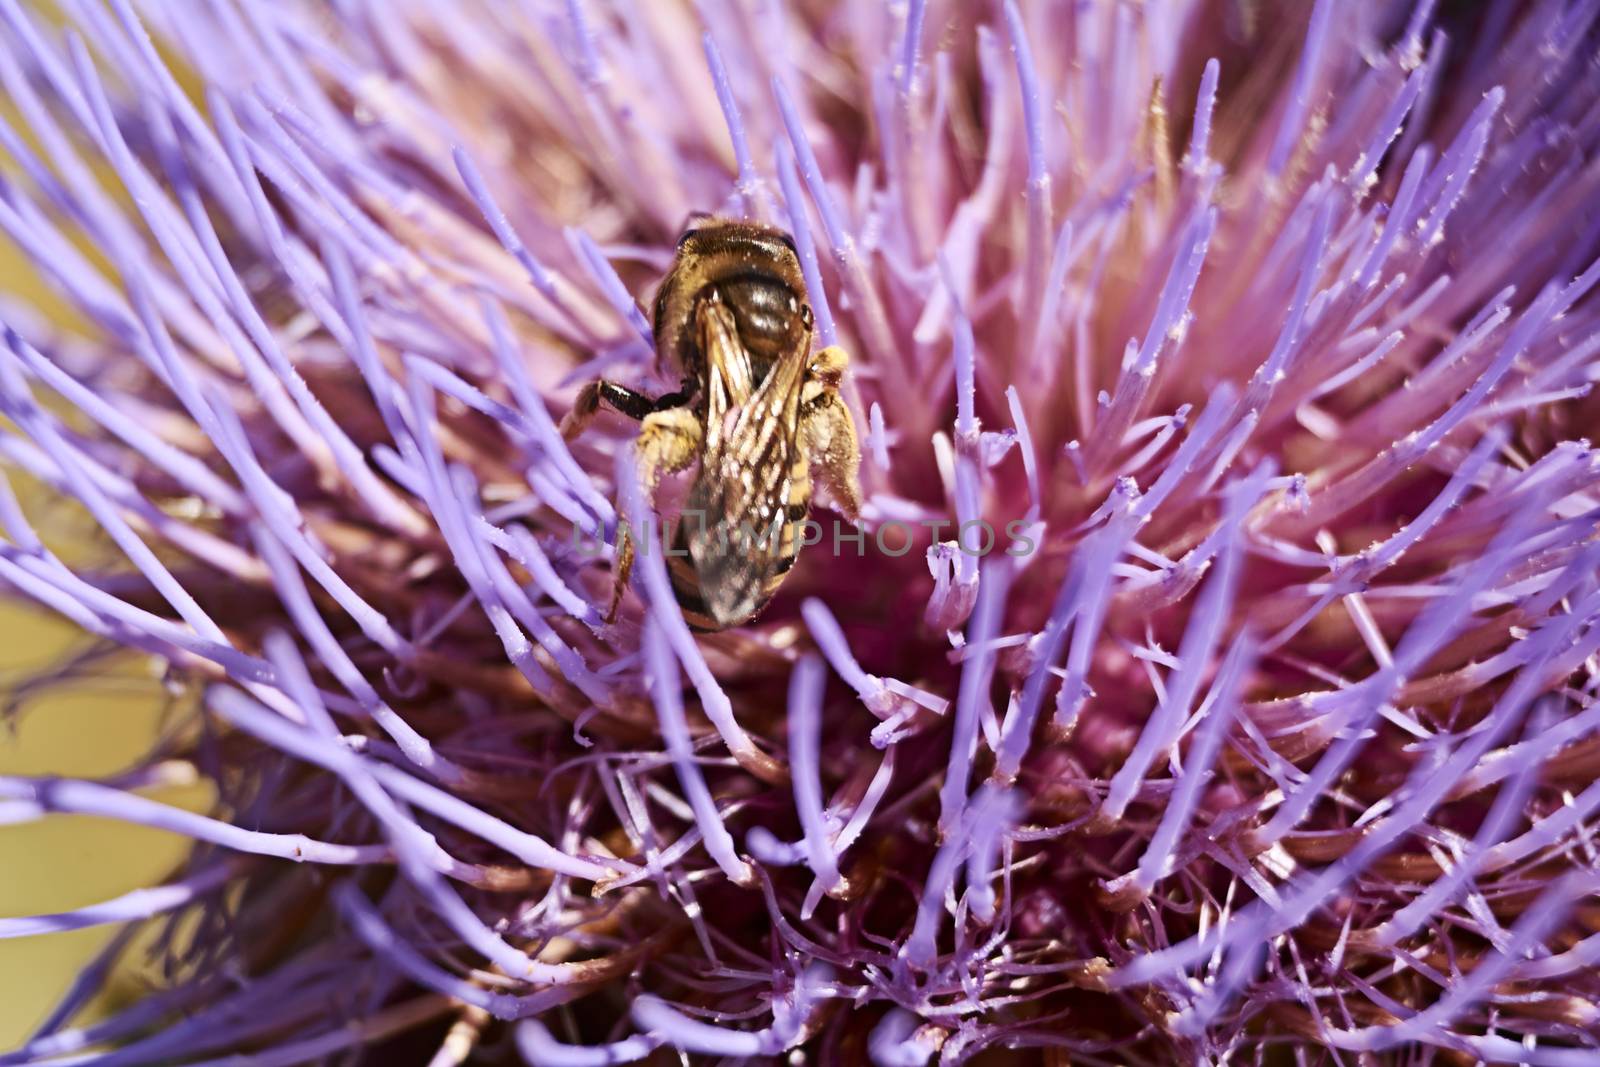 Wasp on pink flower eating pollen, macro photography, details, pollination